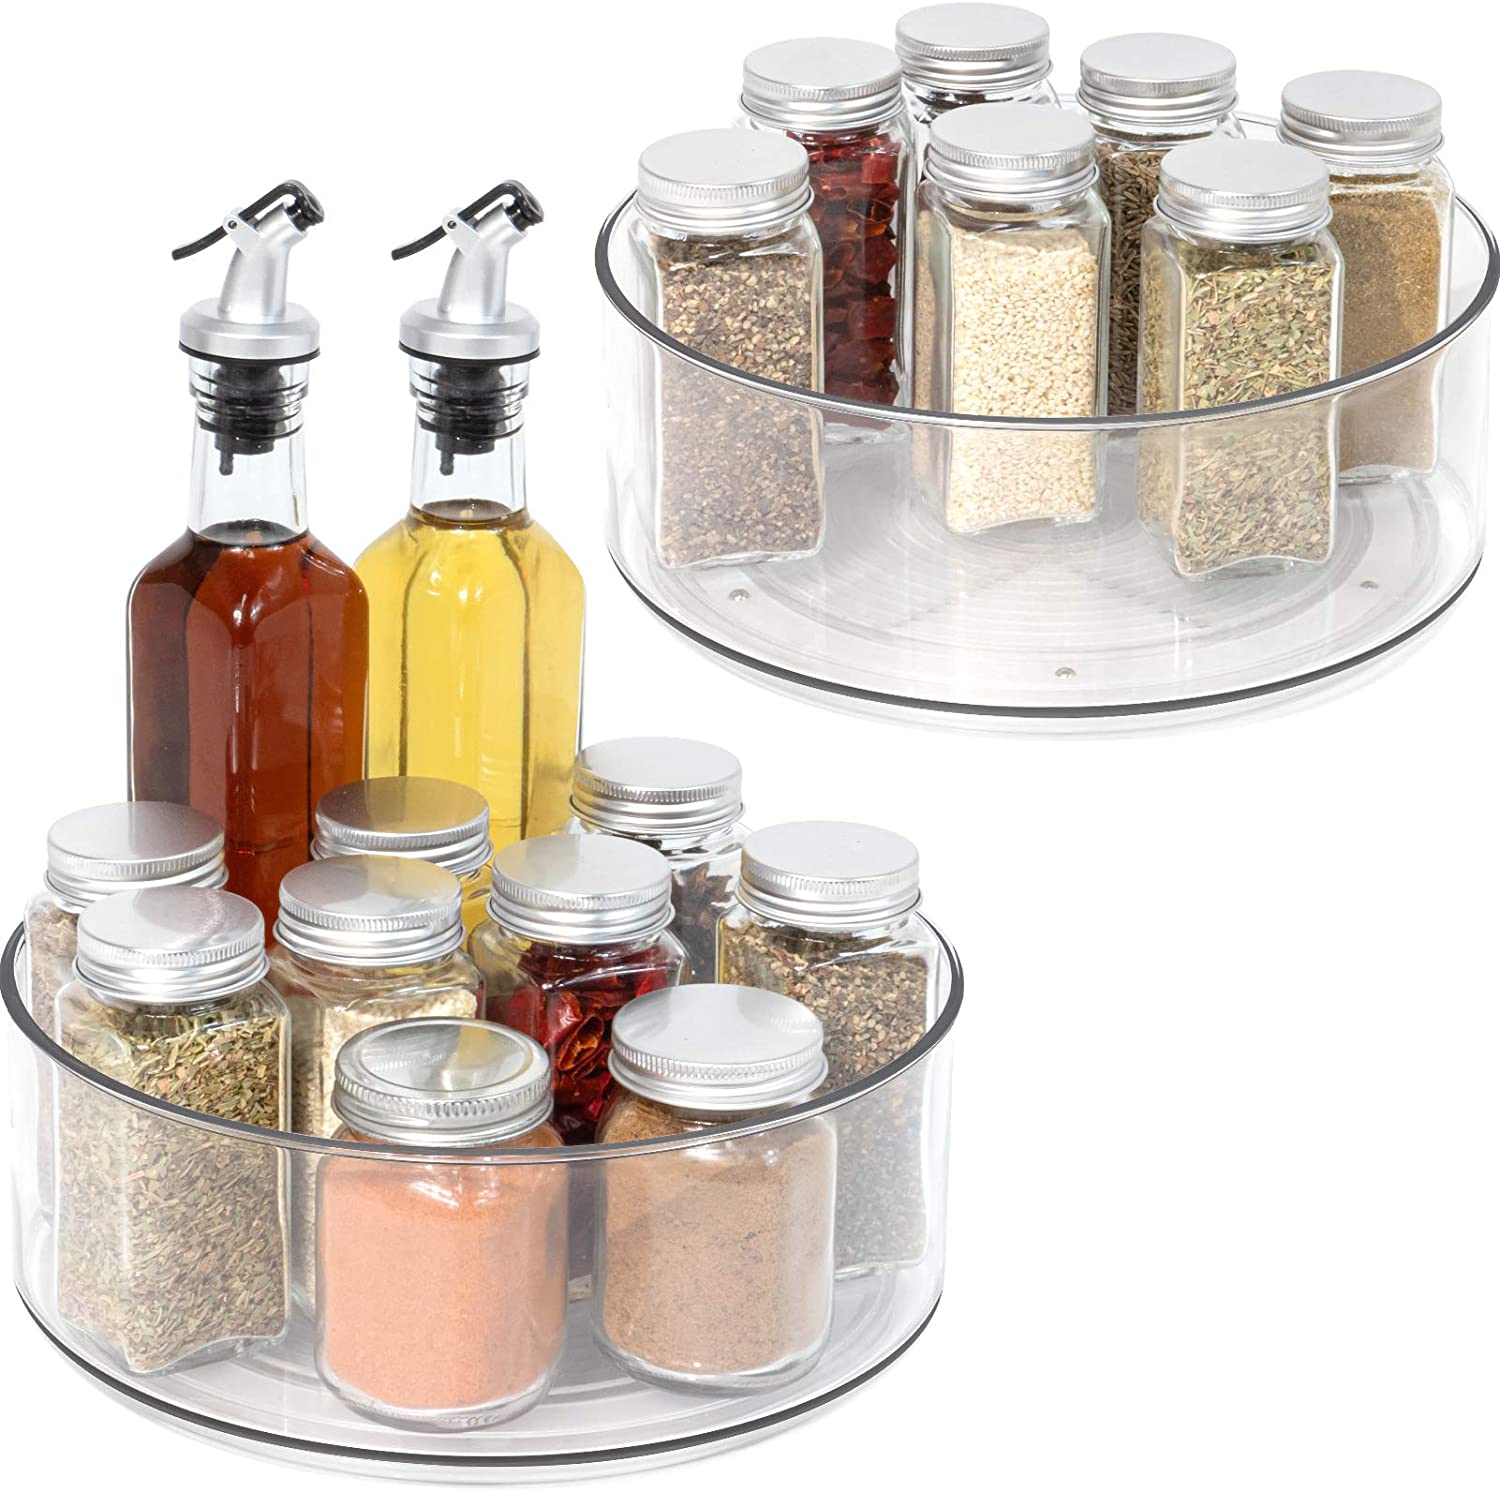 Kitchen organization ideas - Two clear acrylic lazy Susan organizers holding various spices and oils.